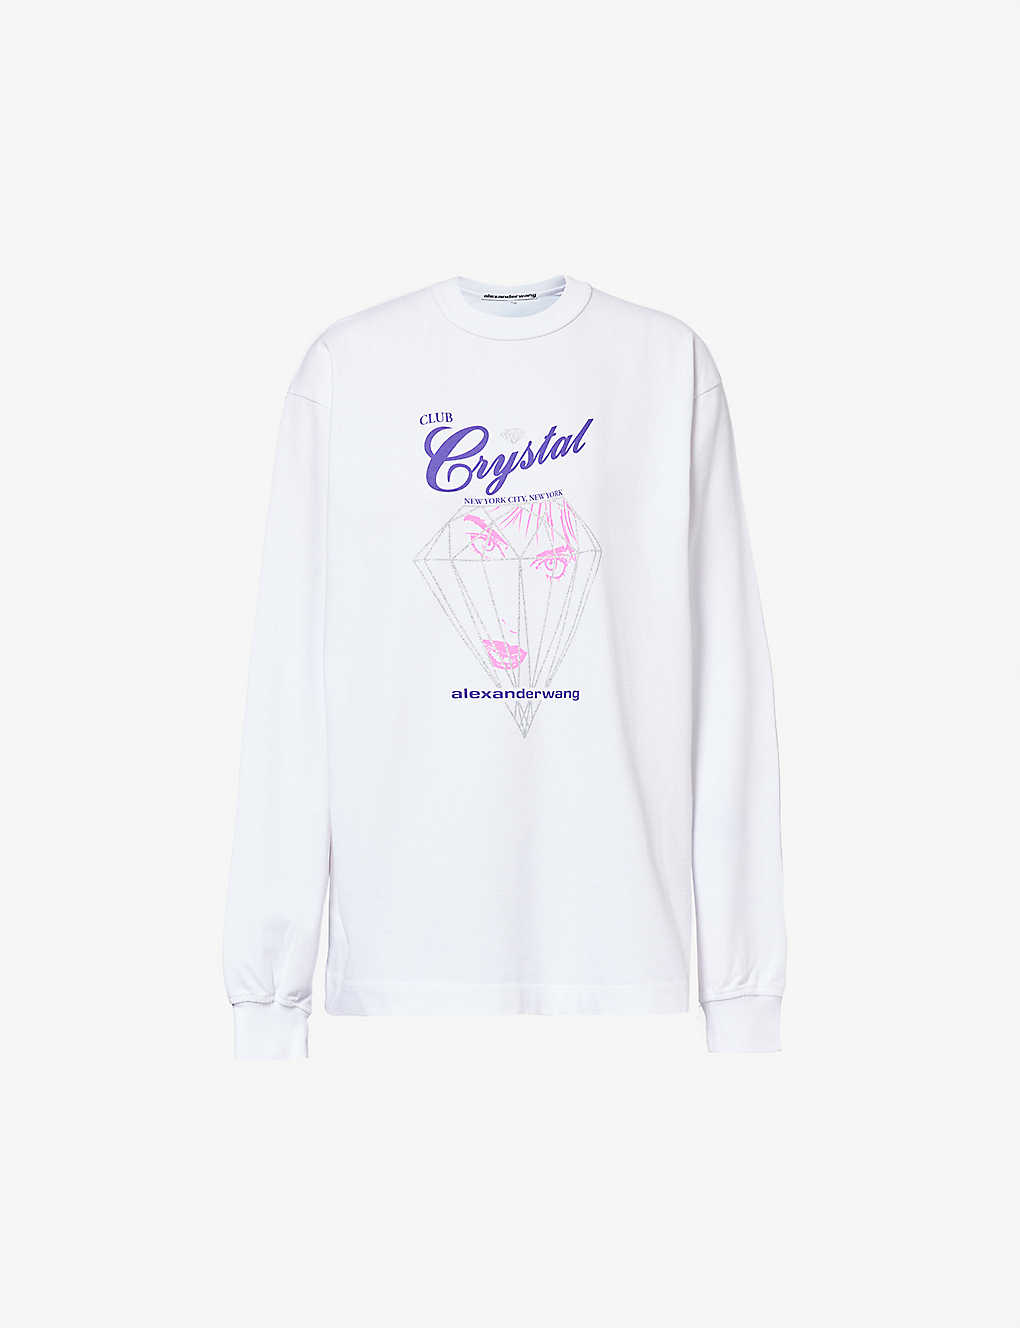 Alexander Wang Womens Bright White Club Crystal Graphic-print Long-sleeved Cotton-jersey T-shirt